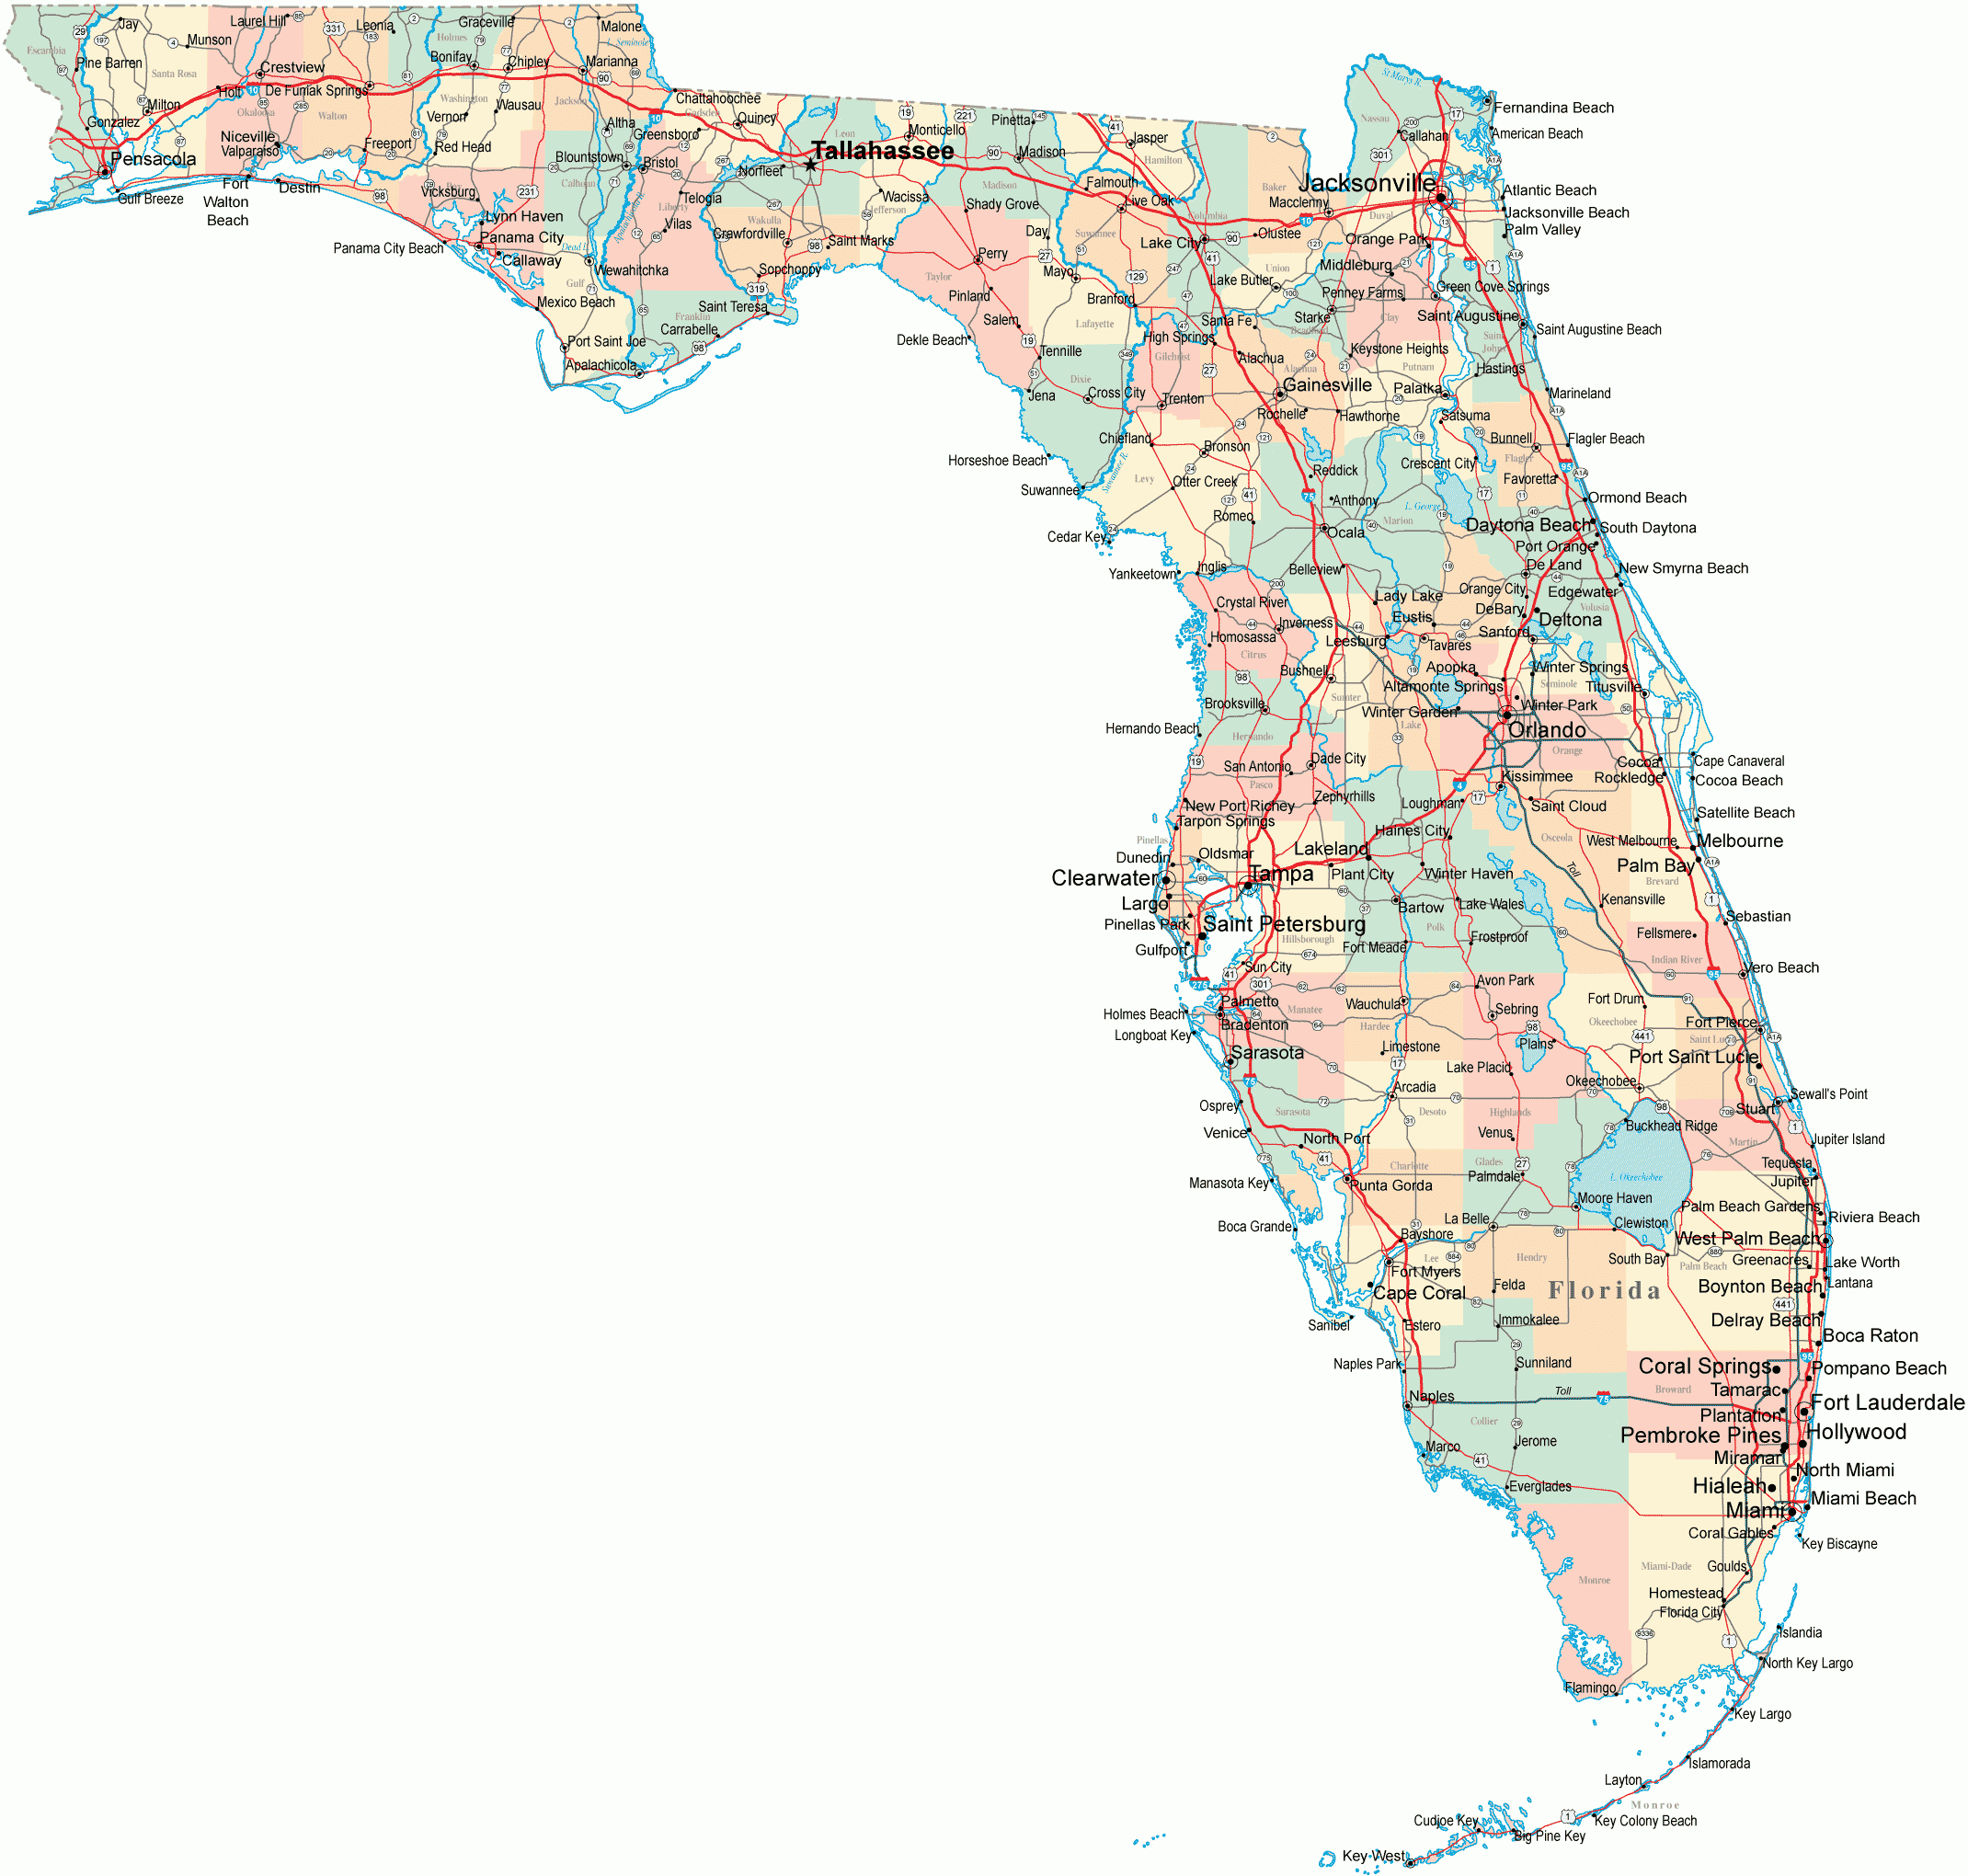 Florida Road Map - Fl Road Map - Florida Highway Map - State Of Florida Map Mileage